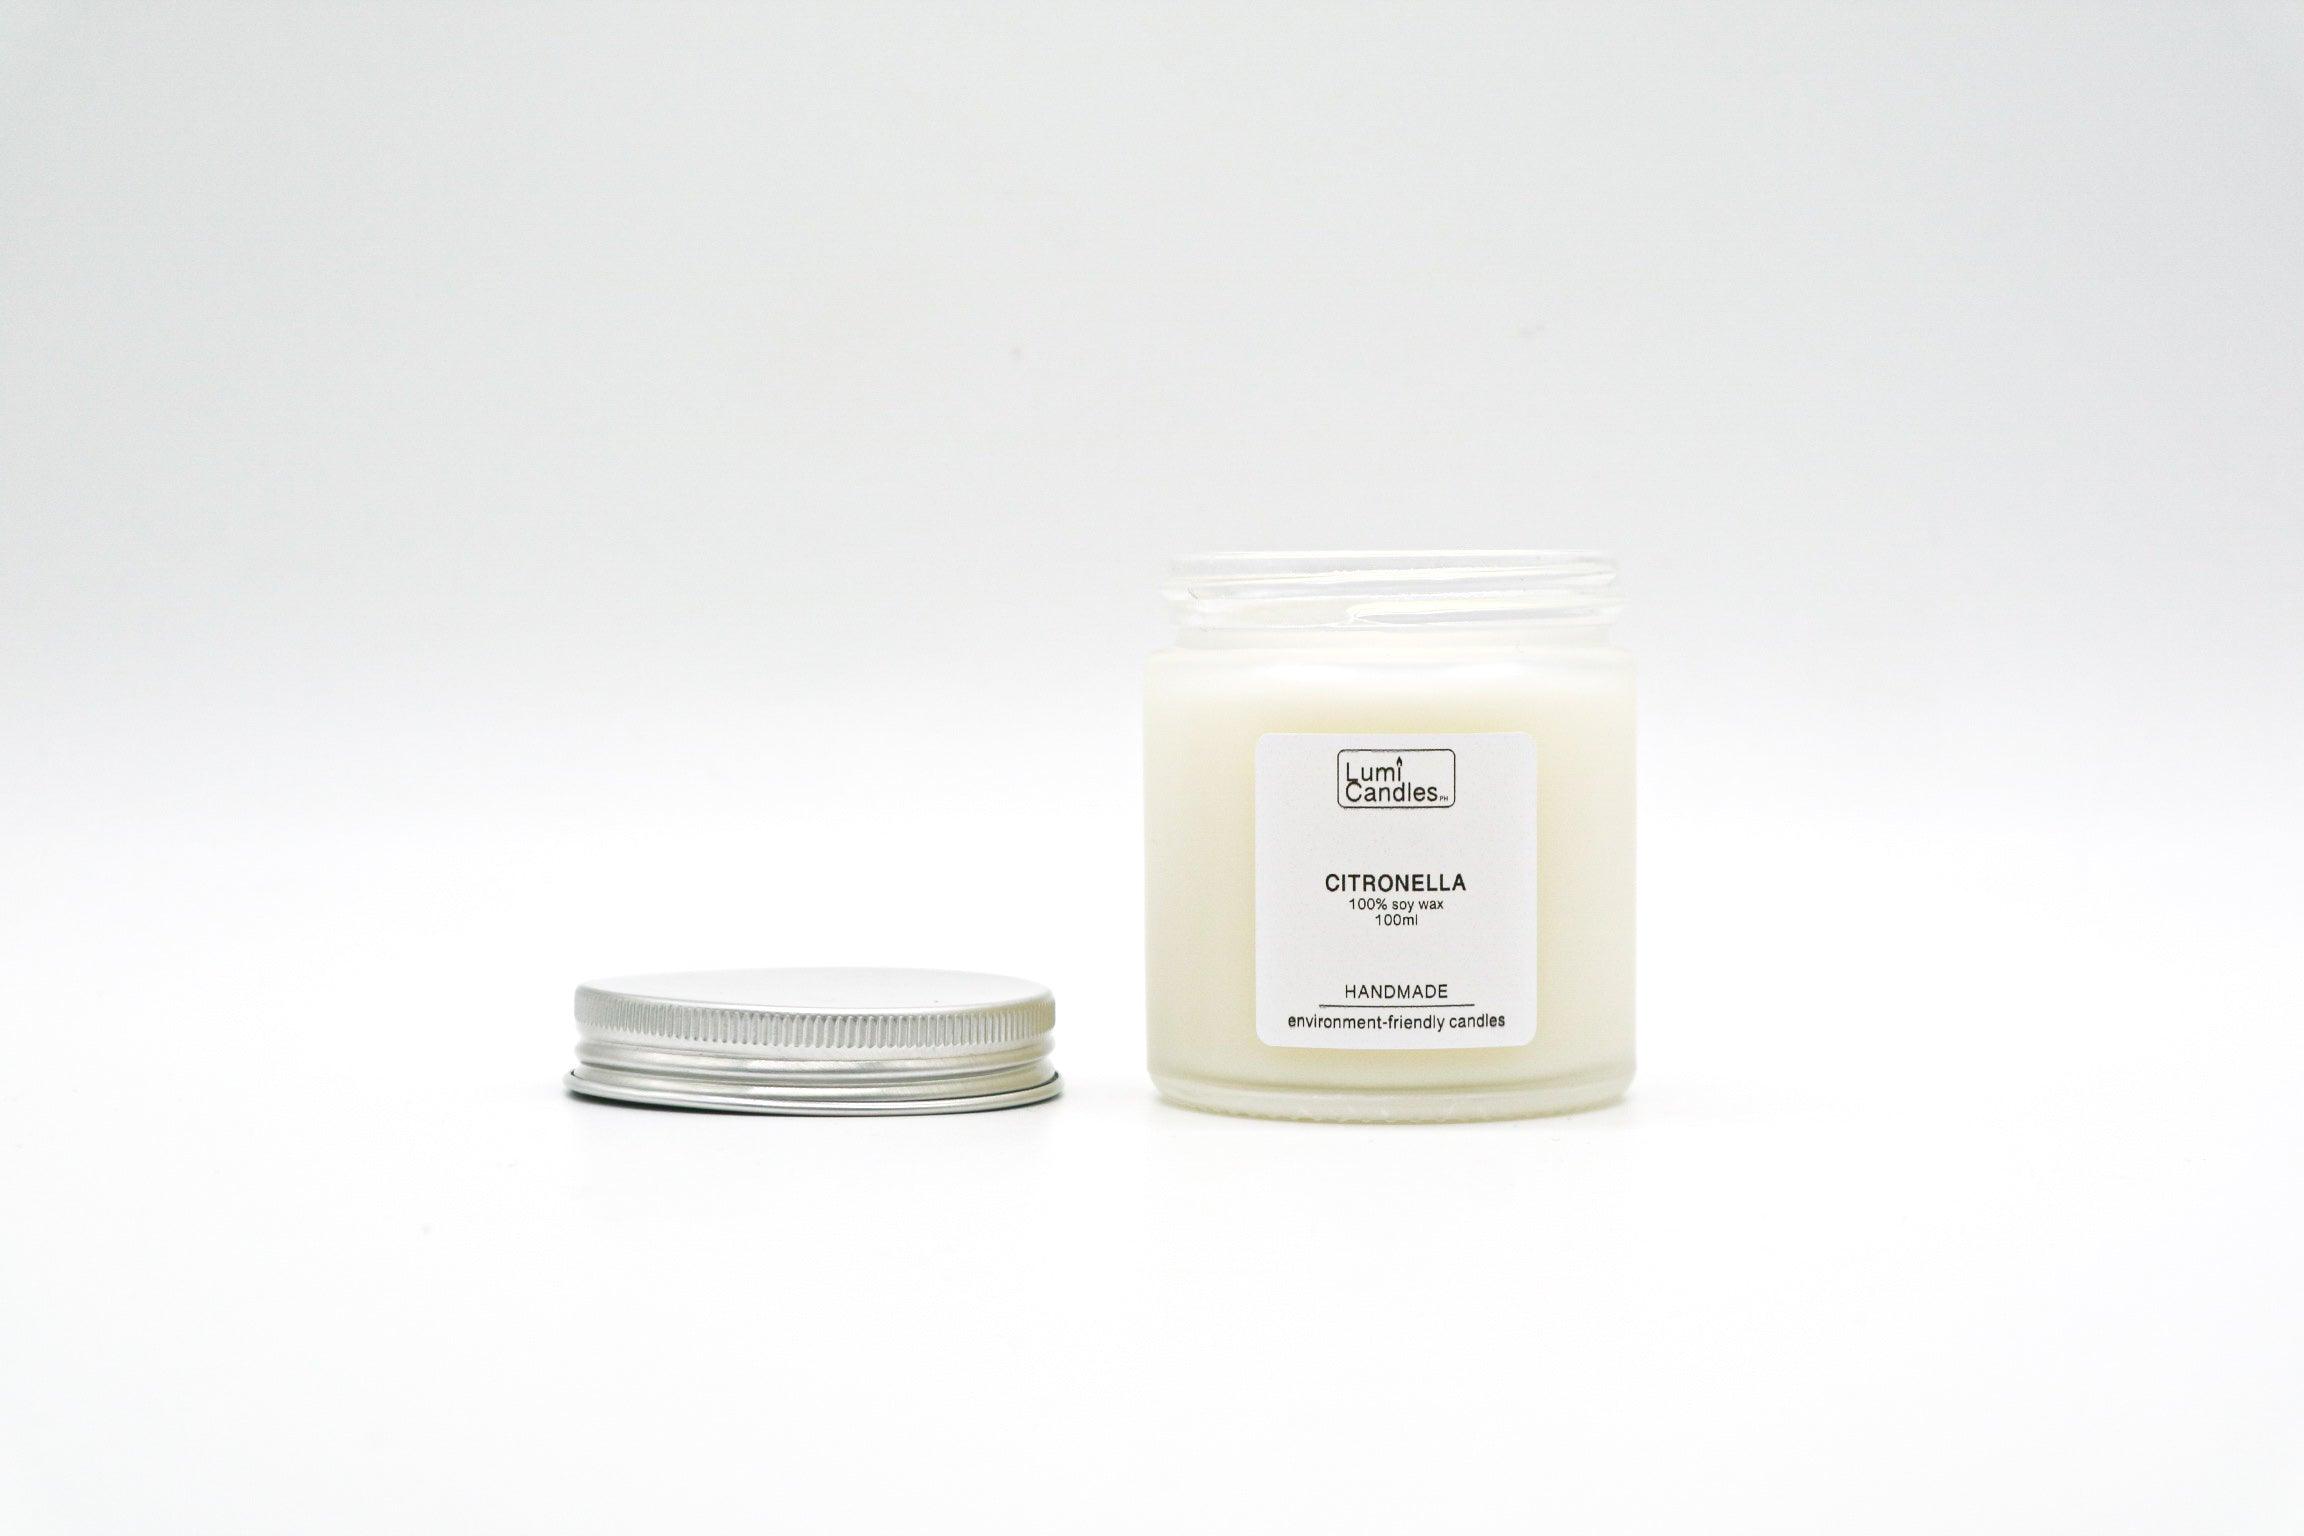 Citronella LUMI scented candle at 100 ML by LUMI Candles PH